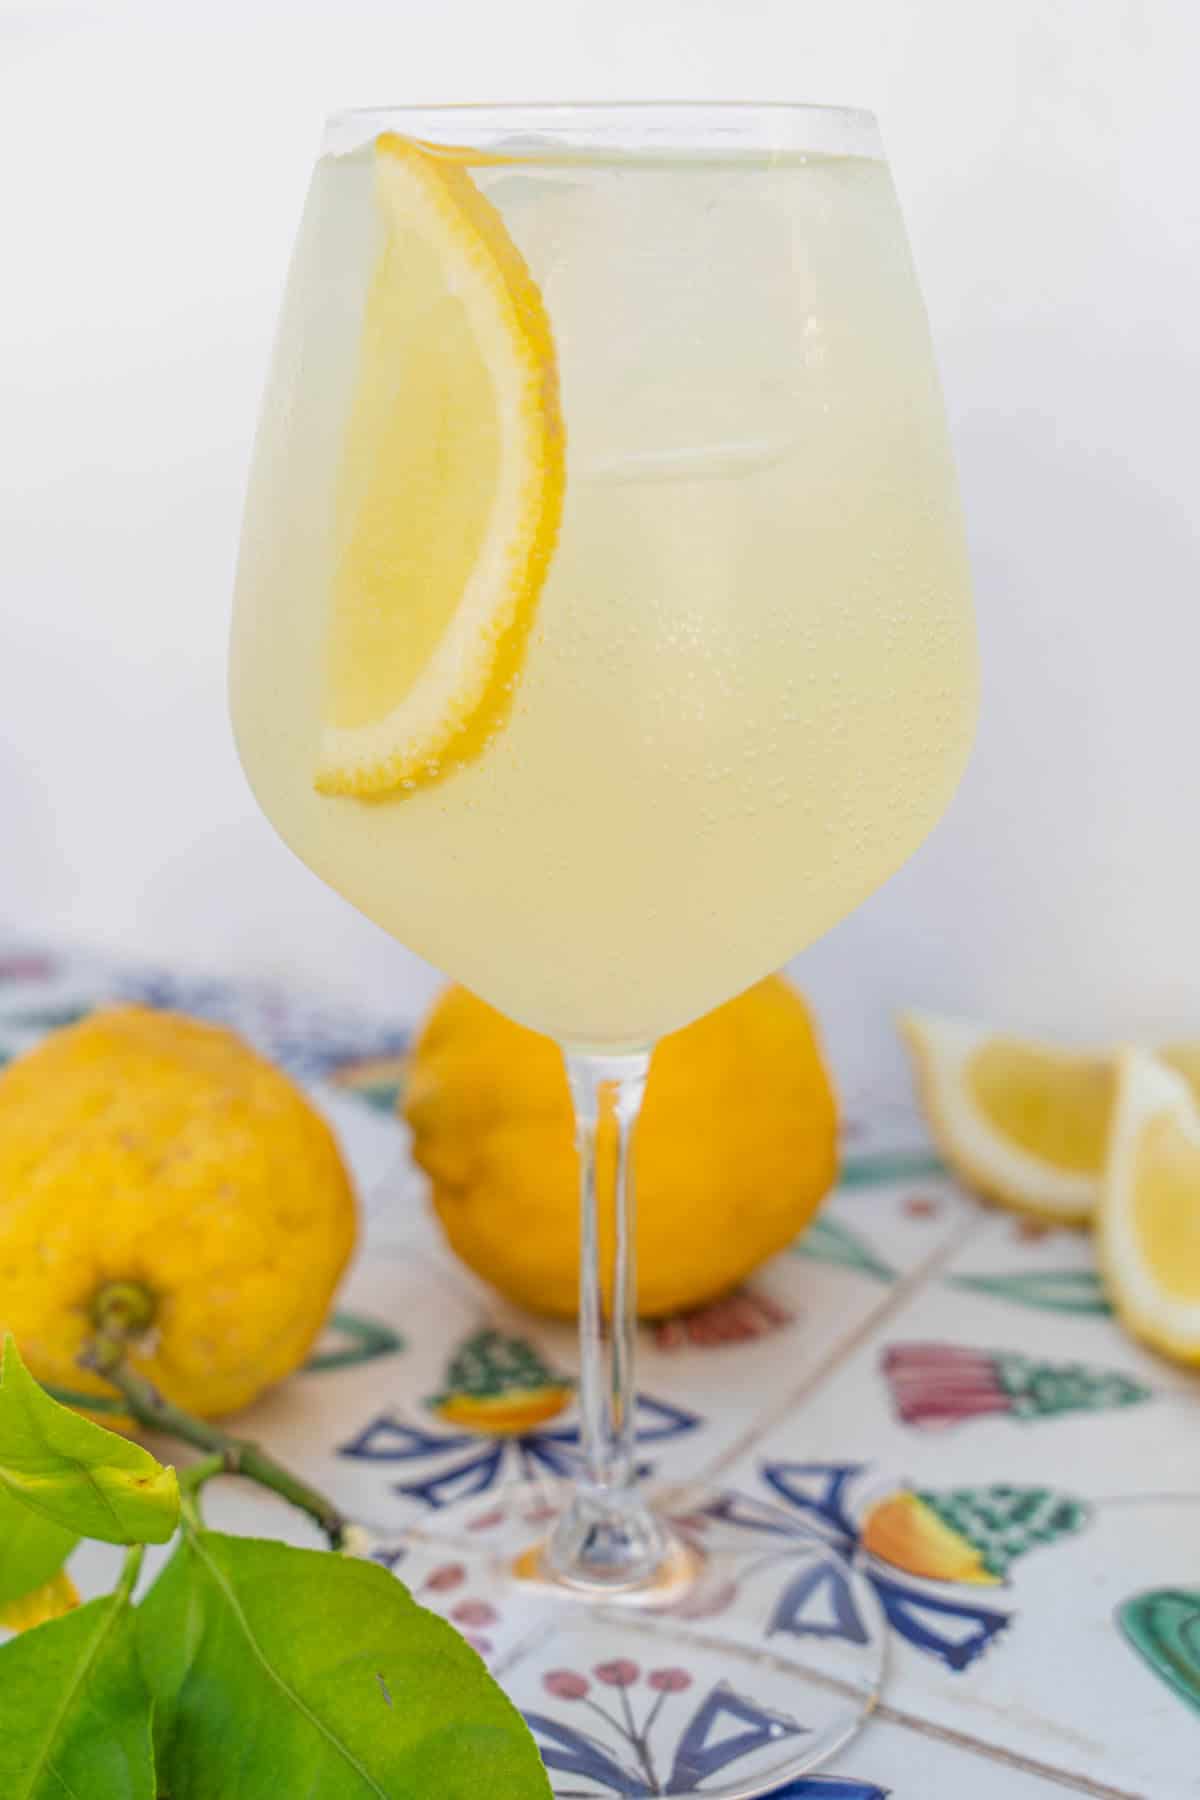 Limoncello Spritz served in a glass and garnish of lemon